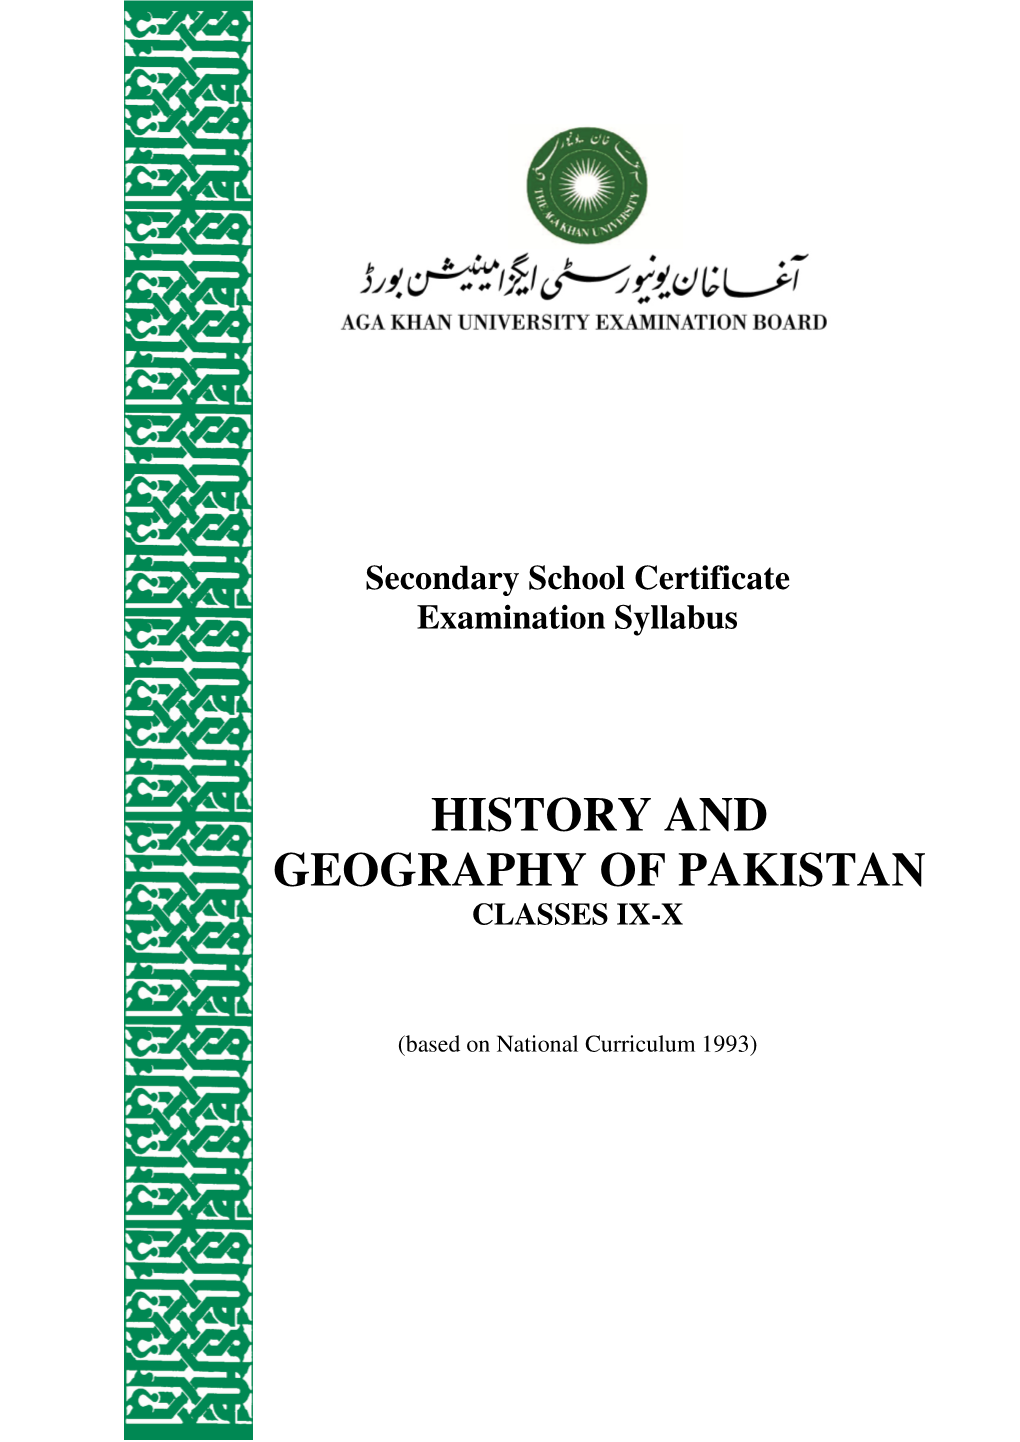 History and Geography of Pakistan Classes Ix-X